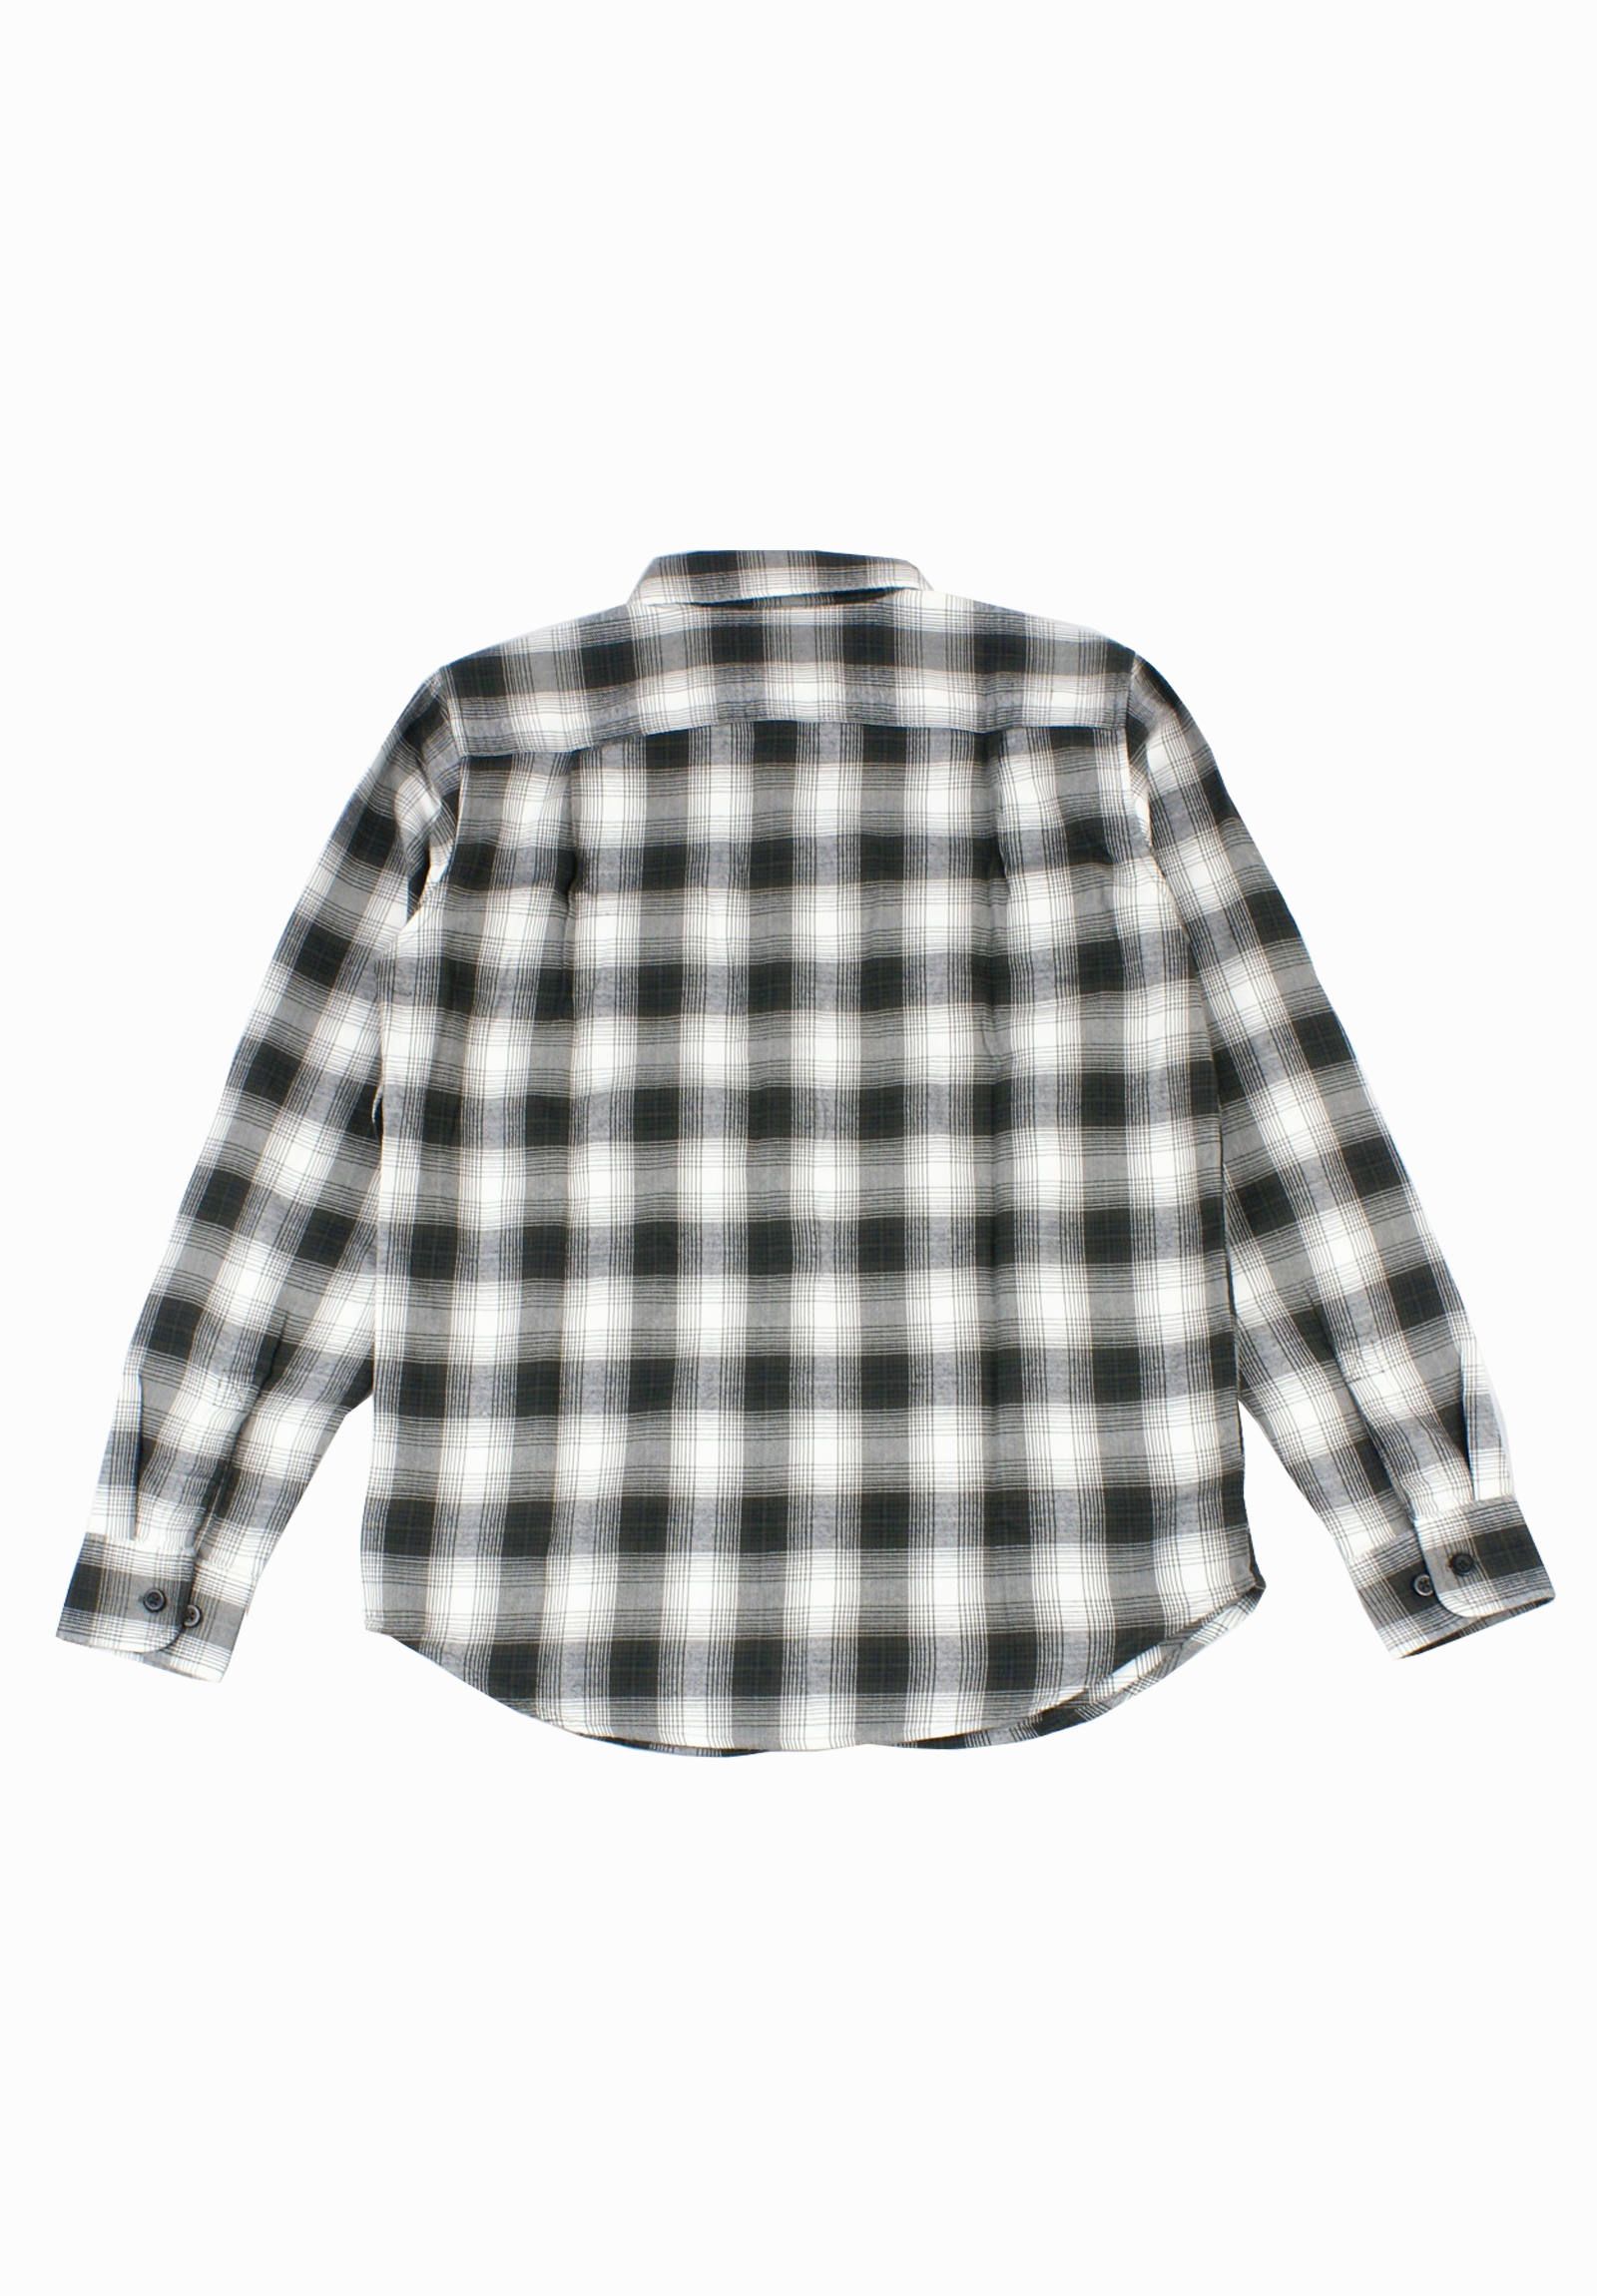 OBEY - チェックシャツ L/S Checked shirt -White&Black- | FROG's TAIL